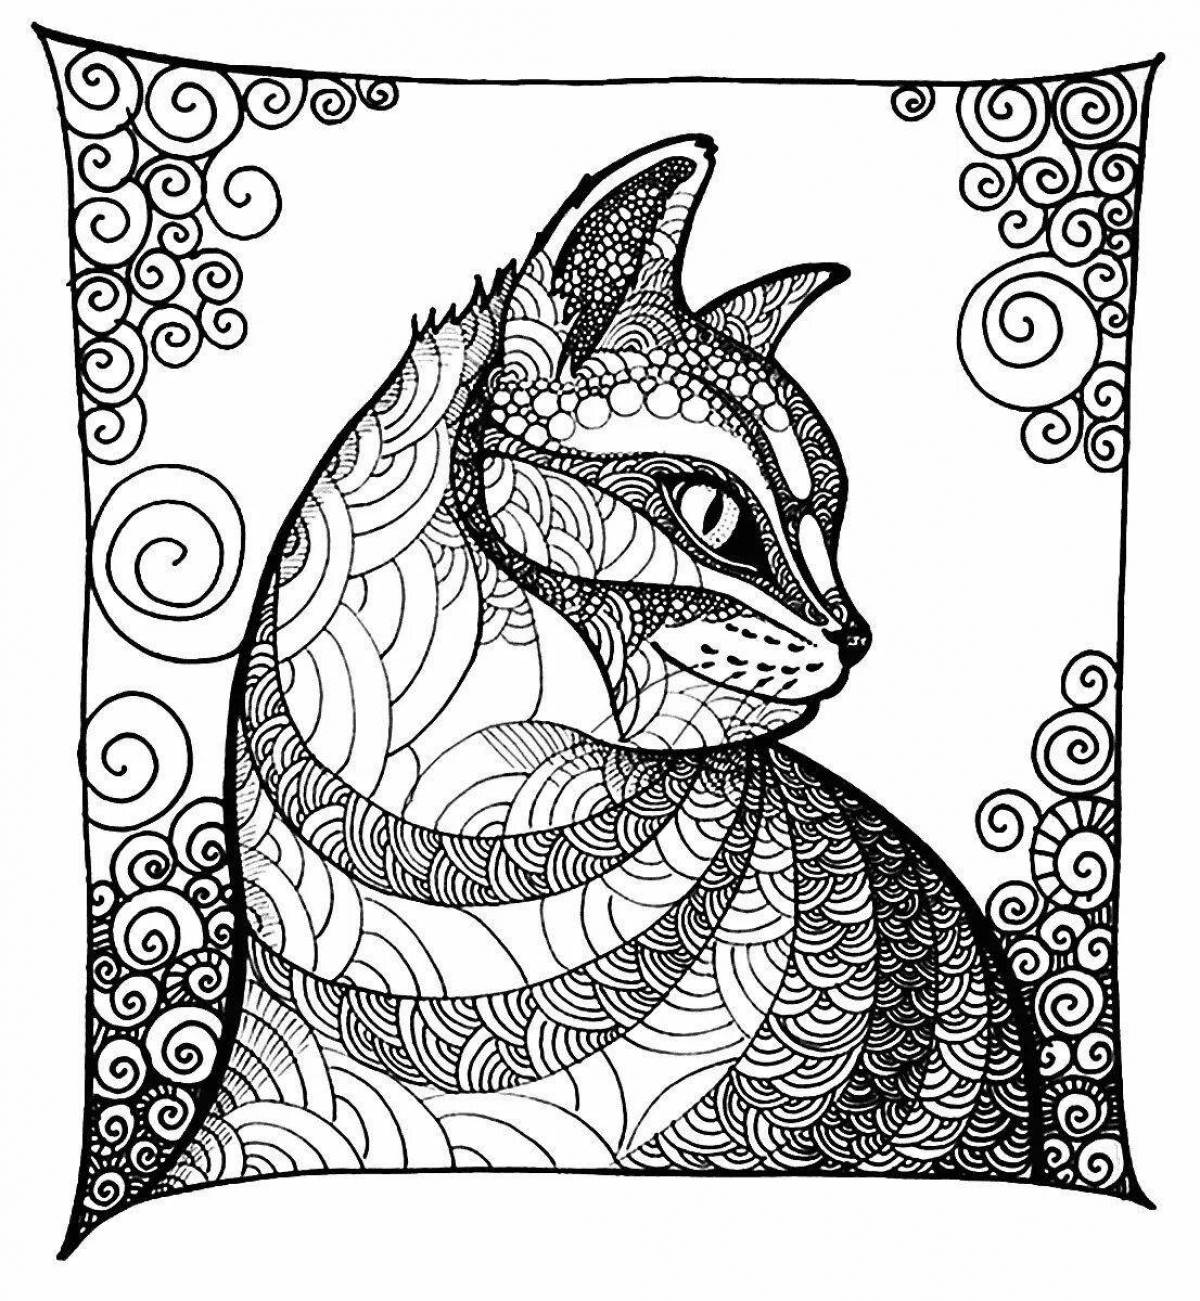 Charming zentangle coloring book